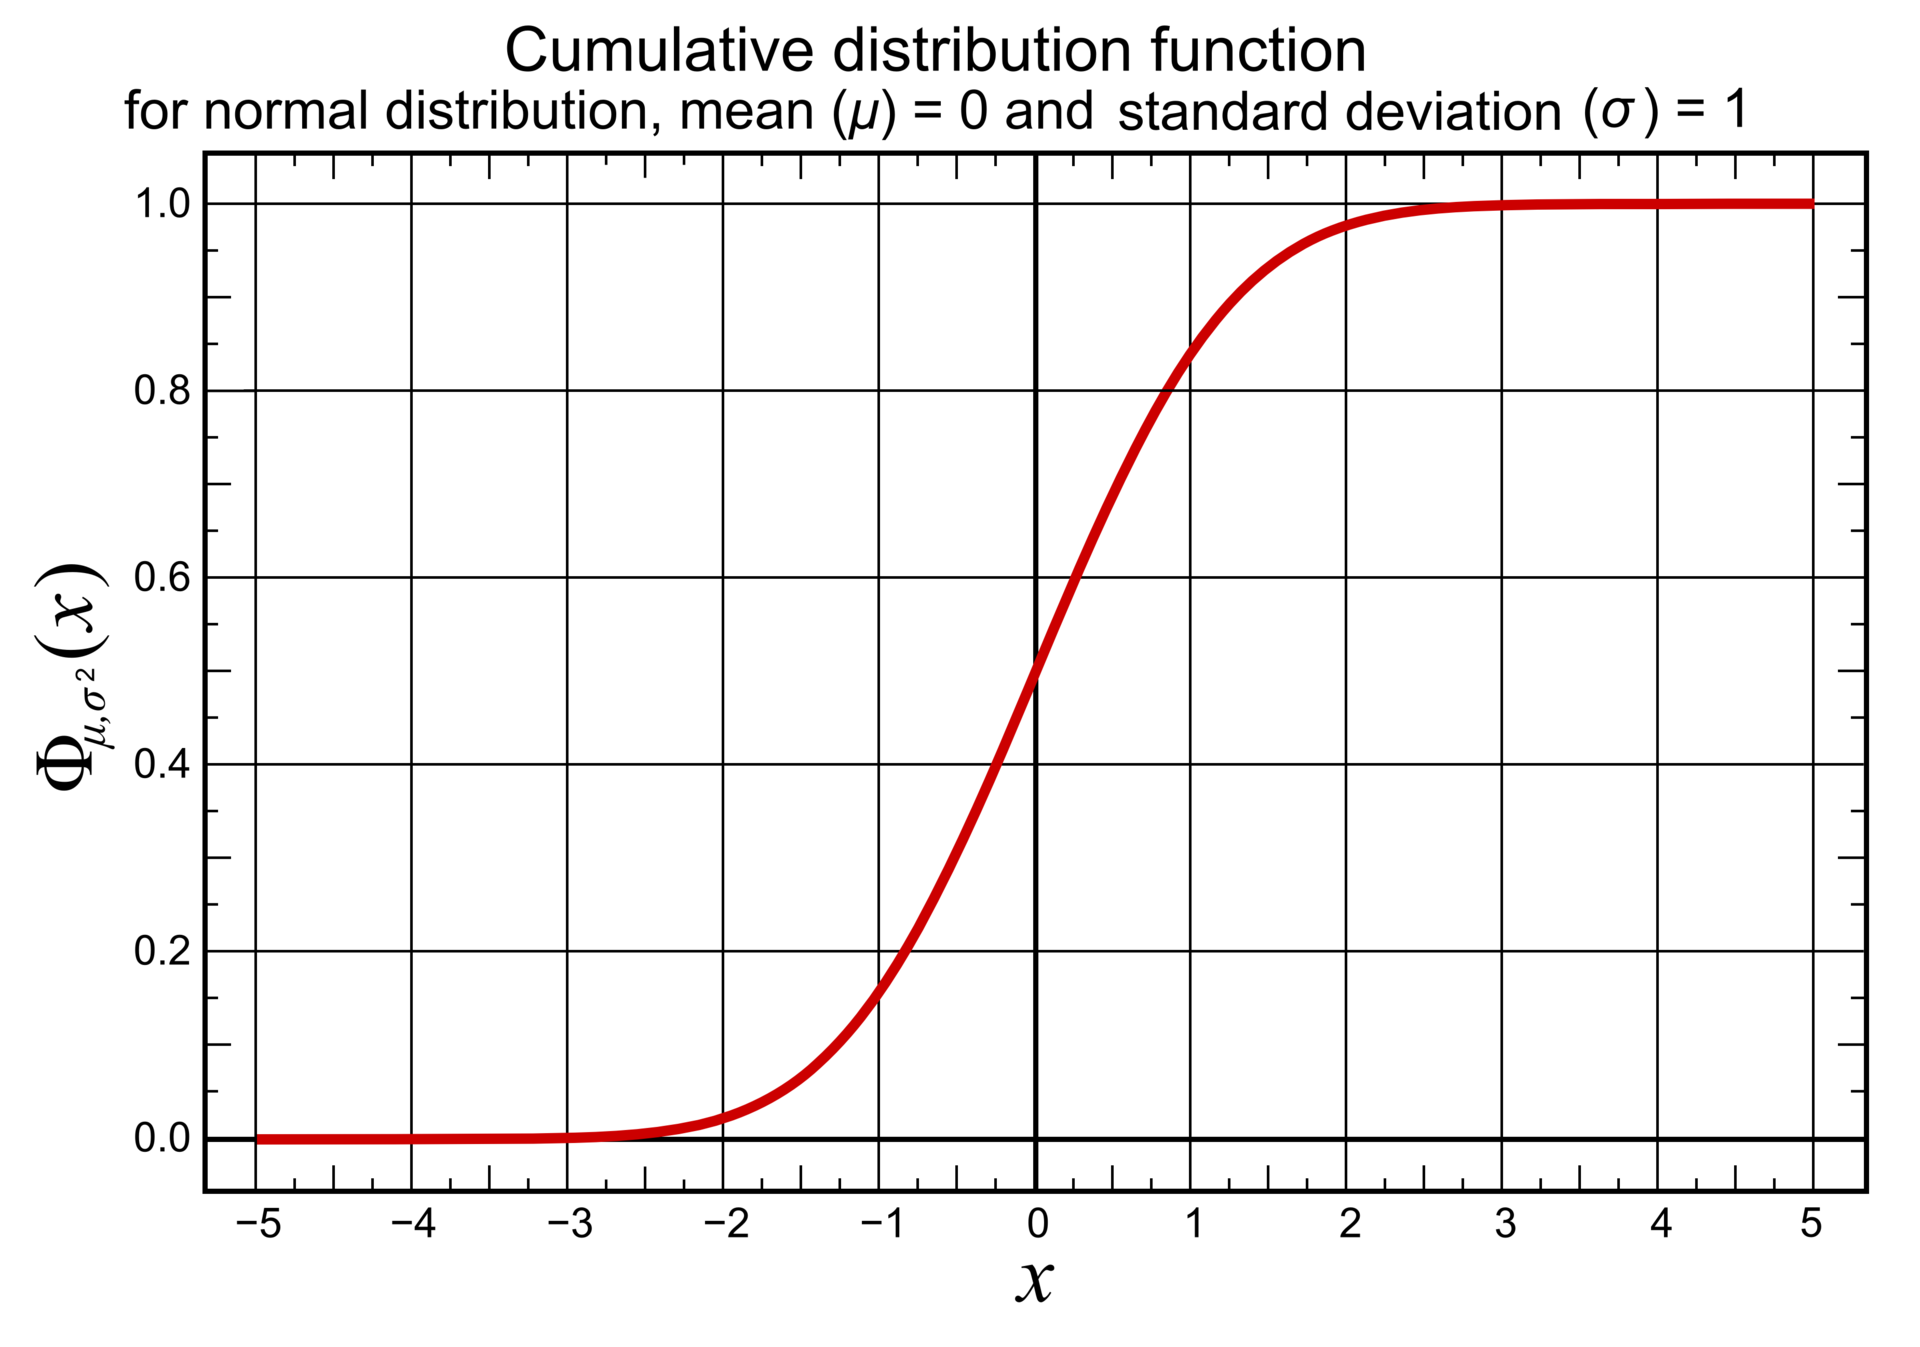 1920px-Cumulative_distribution_function_for_normal_distribution%2C_mean_0_and_sd_1.png